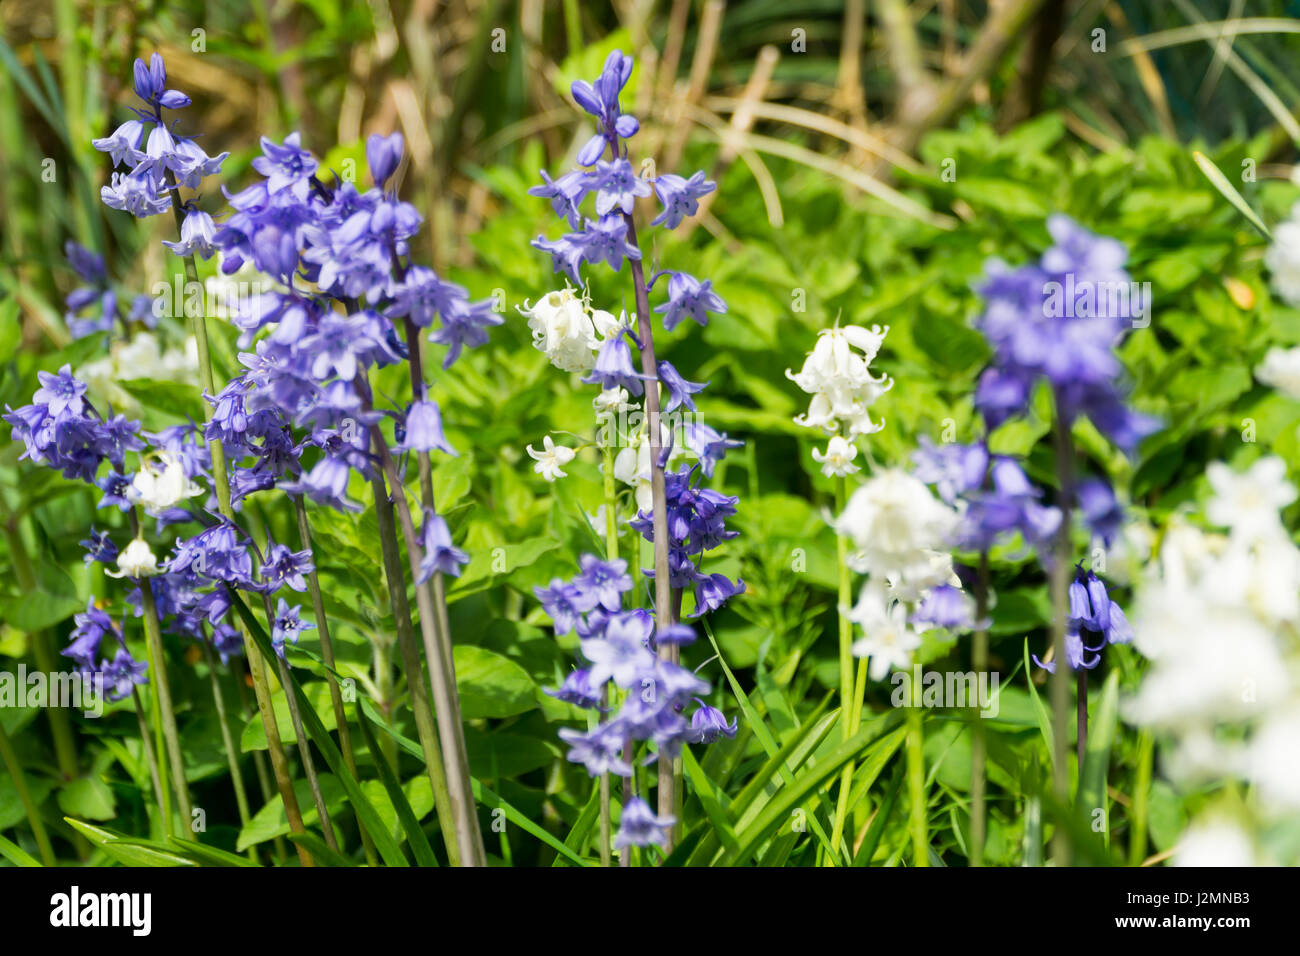 Blue & white bell flowers amongst the grass in a garden Stock Photo